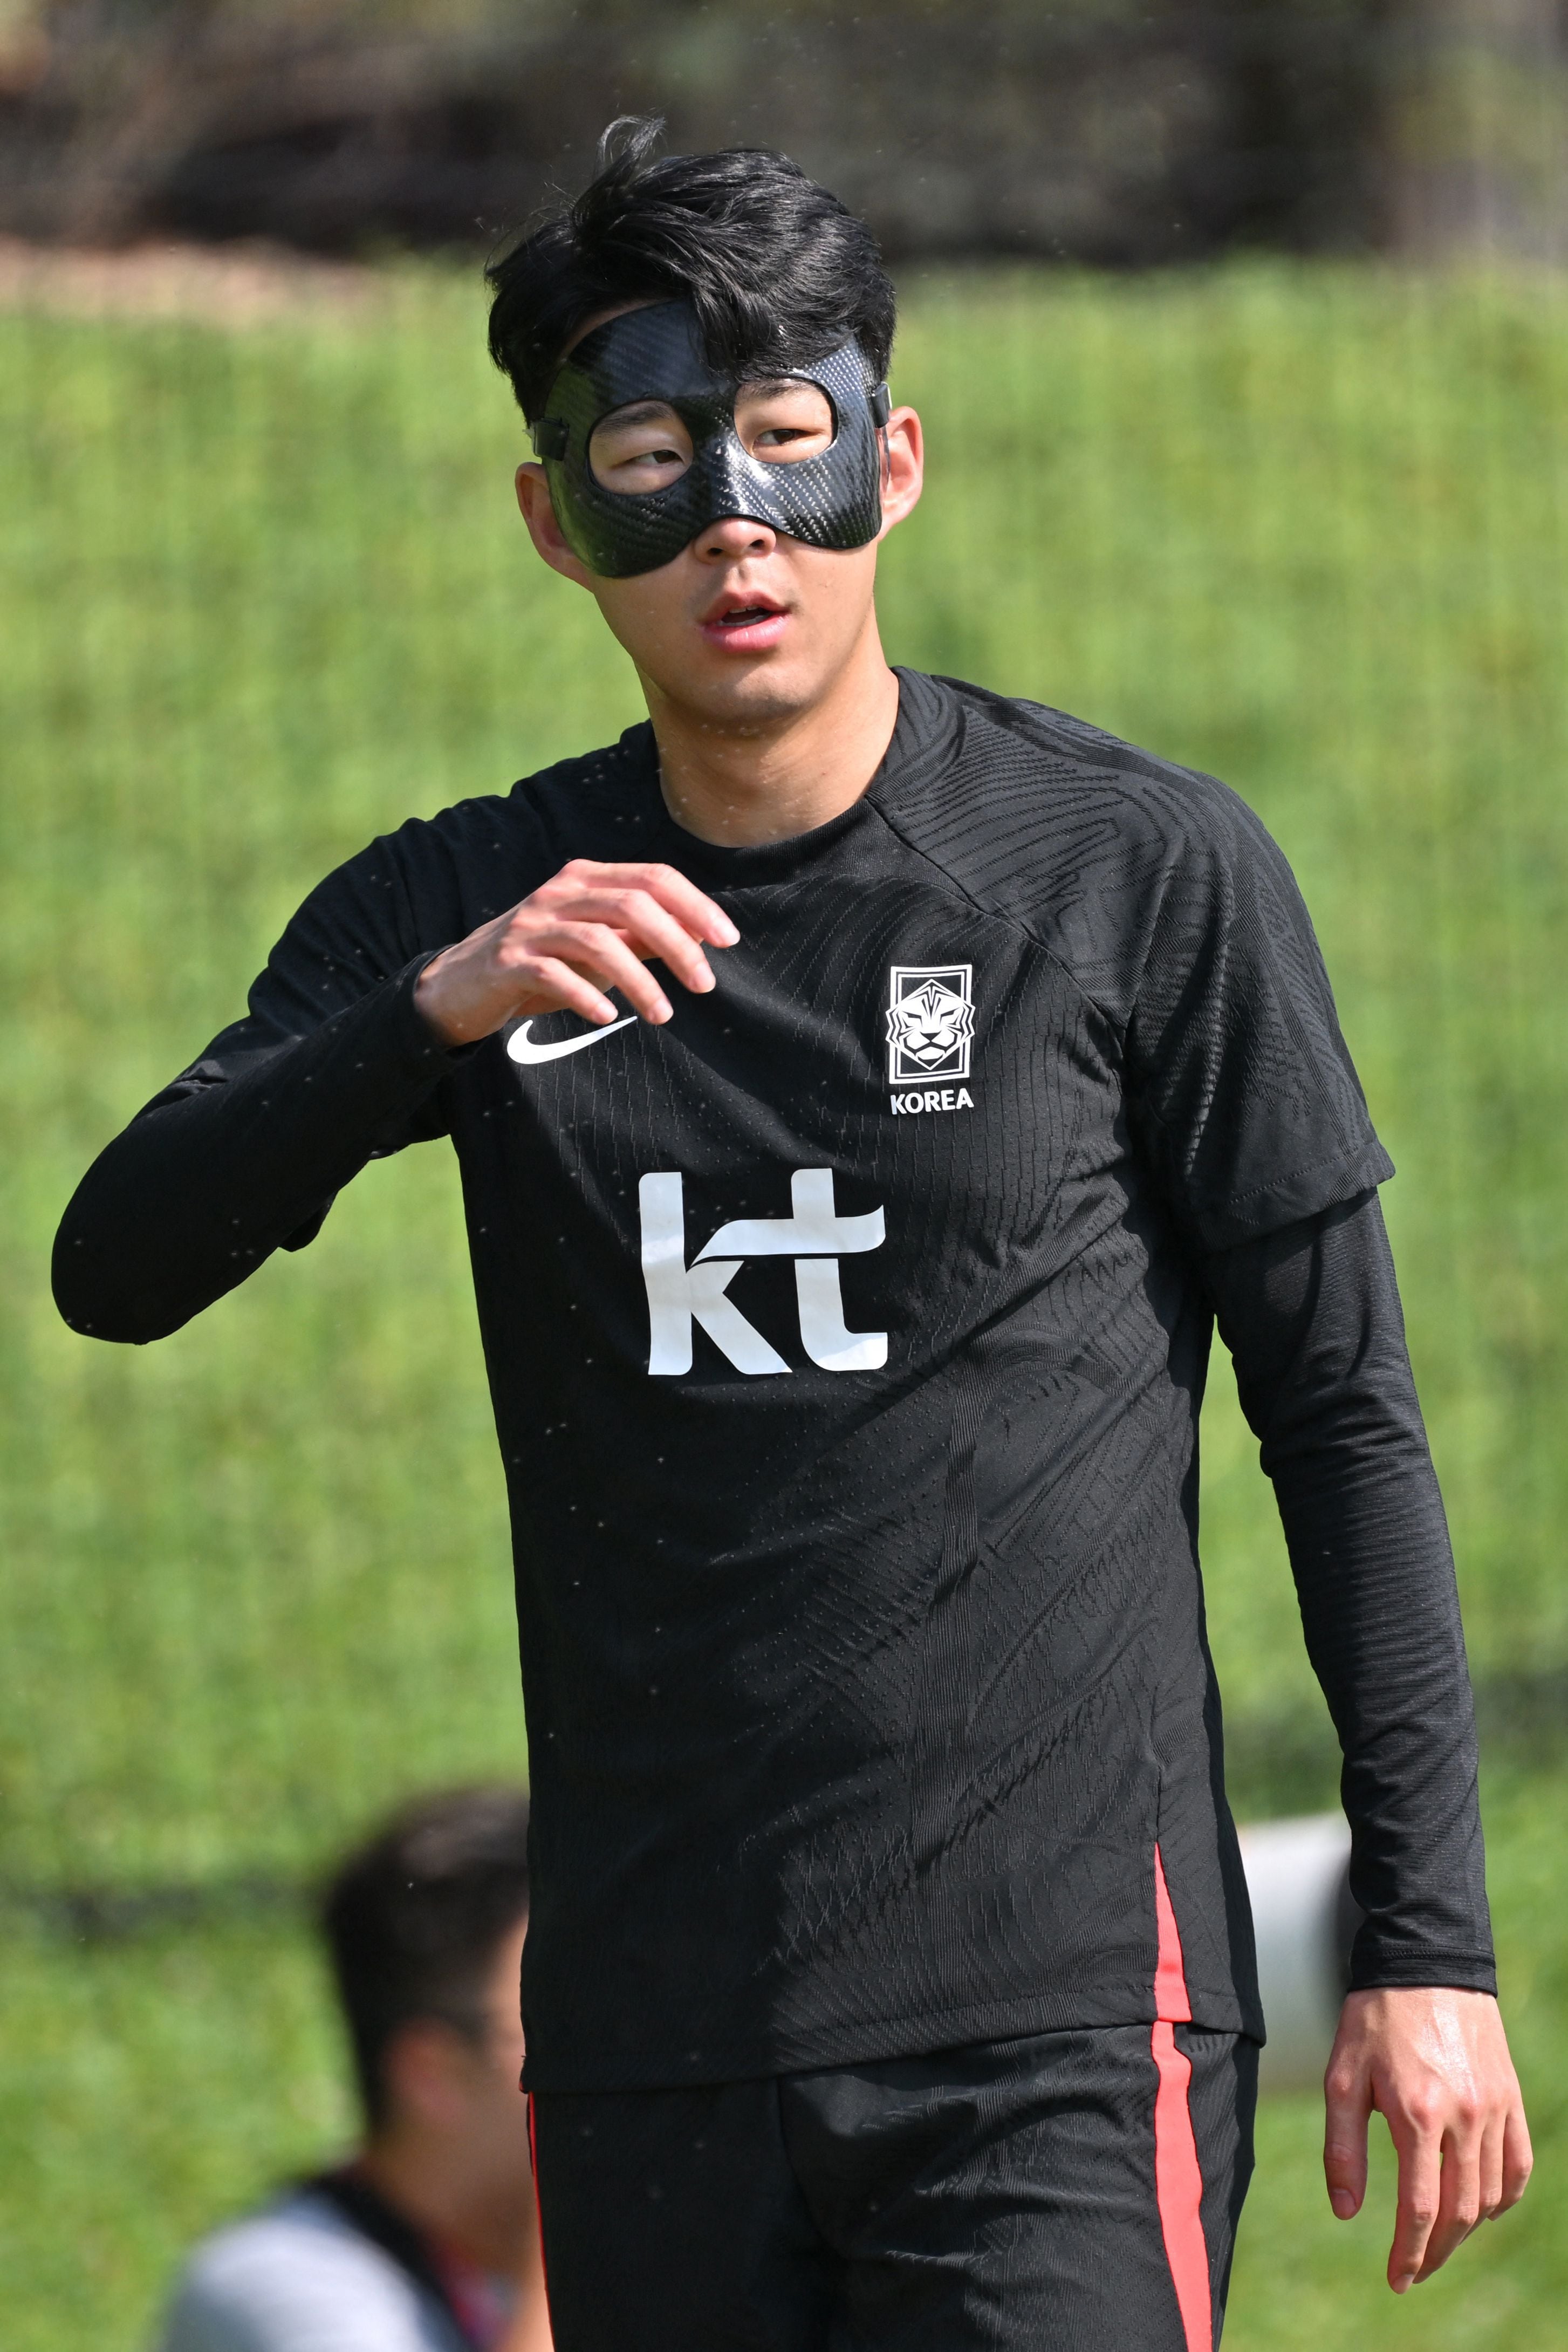 Son Heung-min says ready to play at World Cup with protective mask